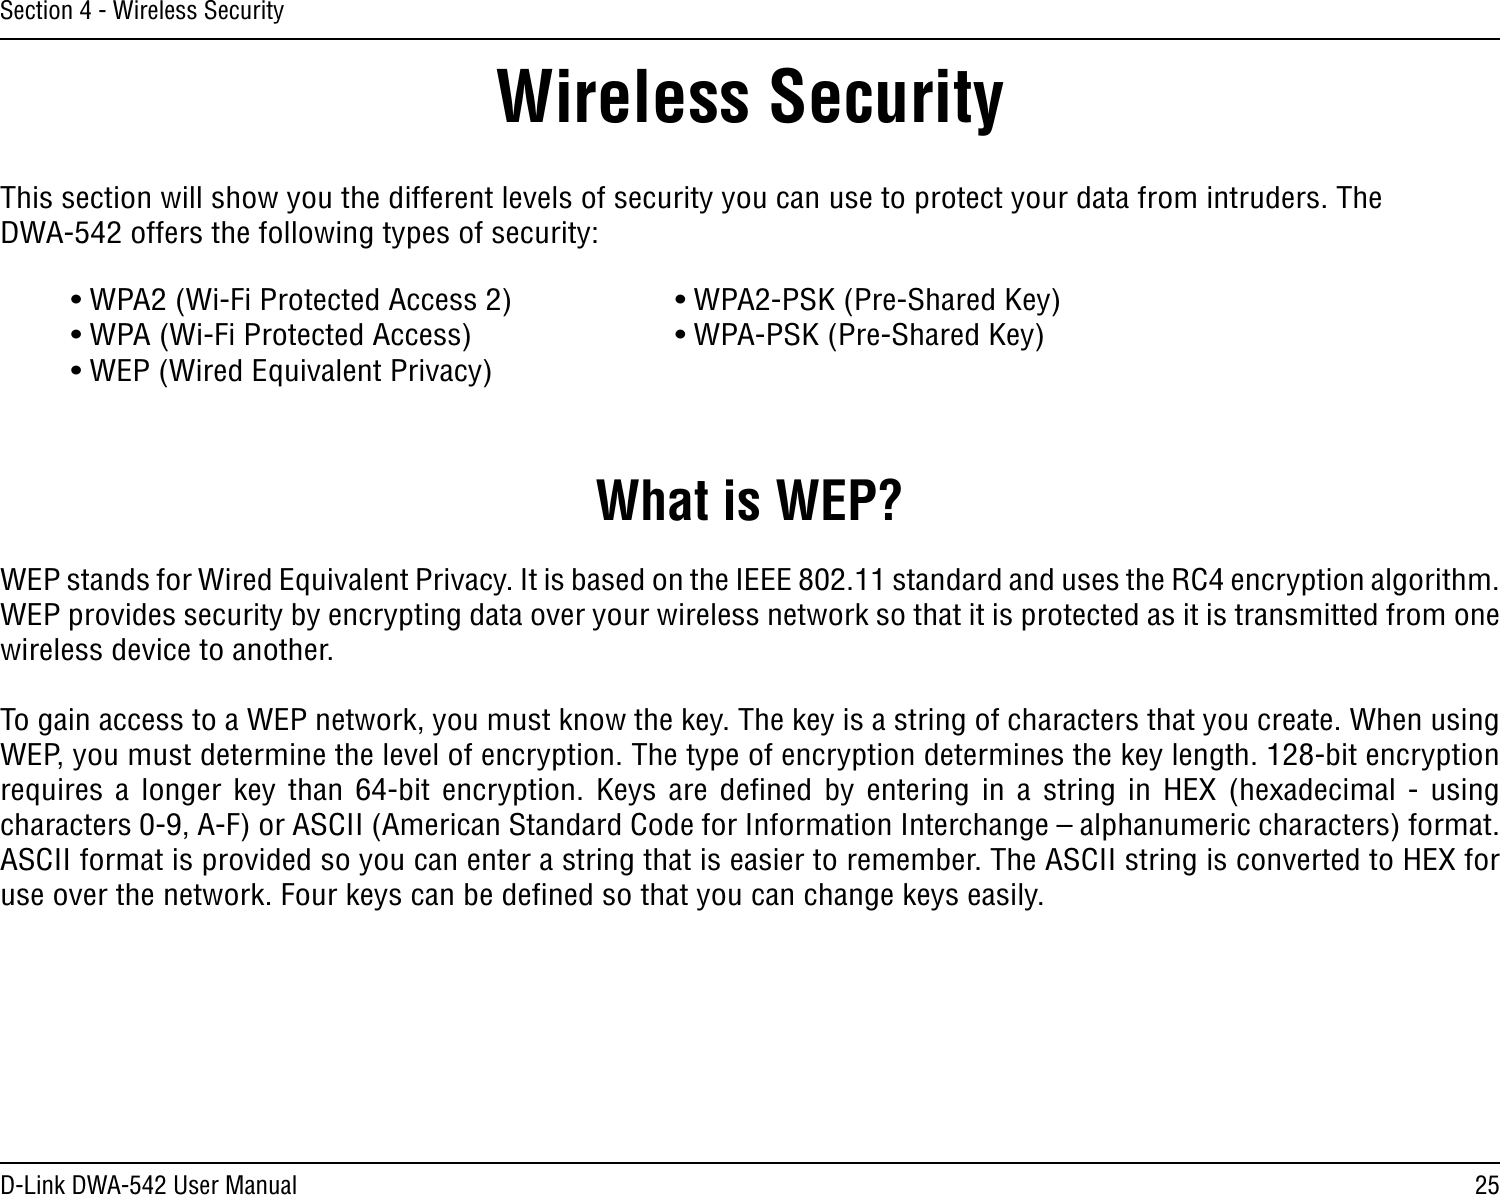 25D-Link DWA-542 User ManualSection 4 - Wireless SecurityWireless SecurityThis section will show you the different levels of security you can use to protect your data from intruders. The DWA-542 offers the following types of security:• WPA2 (Wi-Fi Protected Access 2)      • WPA2-PSK (Pre-Shared Key)• WPA (Wi-Fi Protected Access)      • WPA-PSK (Pre-Shared Key)• WEP (Wired Equivalent Privacy)     What is WEP?WEP stands for Wired Equivalent Privacy. It is based on the IEEE 802.11 standard and uses the RC4 encryption algorithm. WEP provides security by encrypting data over your wireless network so that it is protected as it is transmitted from one wireless device to another.To gain access to a WEP network, you must know the key. The key is a string of characters that you create. When using WEP, you must determine the level of encryption. The type of encryption determines the key length. 128-bit encryption requires a longer  key  than 64-bit encryption.  Keys  are  deﬁned by  entering  in  a string  in  HEX  (hexadecimal - using characters 0-9, A-F) or ASCII (American Standard Code for Information Interchange – alphanumeric characters) format. ASCII format is provided so you can enter a string that is easier to remember. The ASCII string is converted to HEX for use over the network. Four keys can be deﬁned so that you can change keys easily.